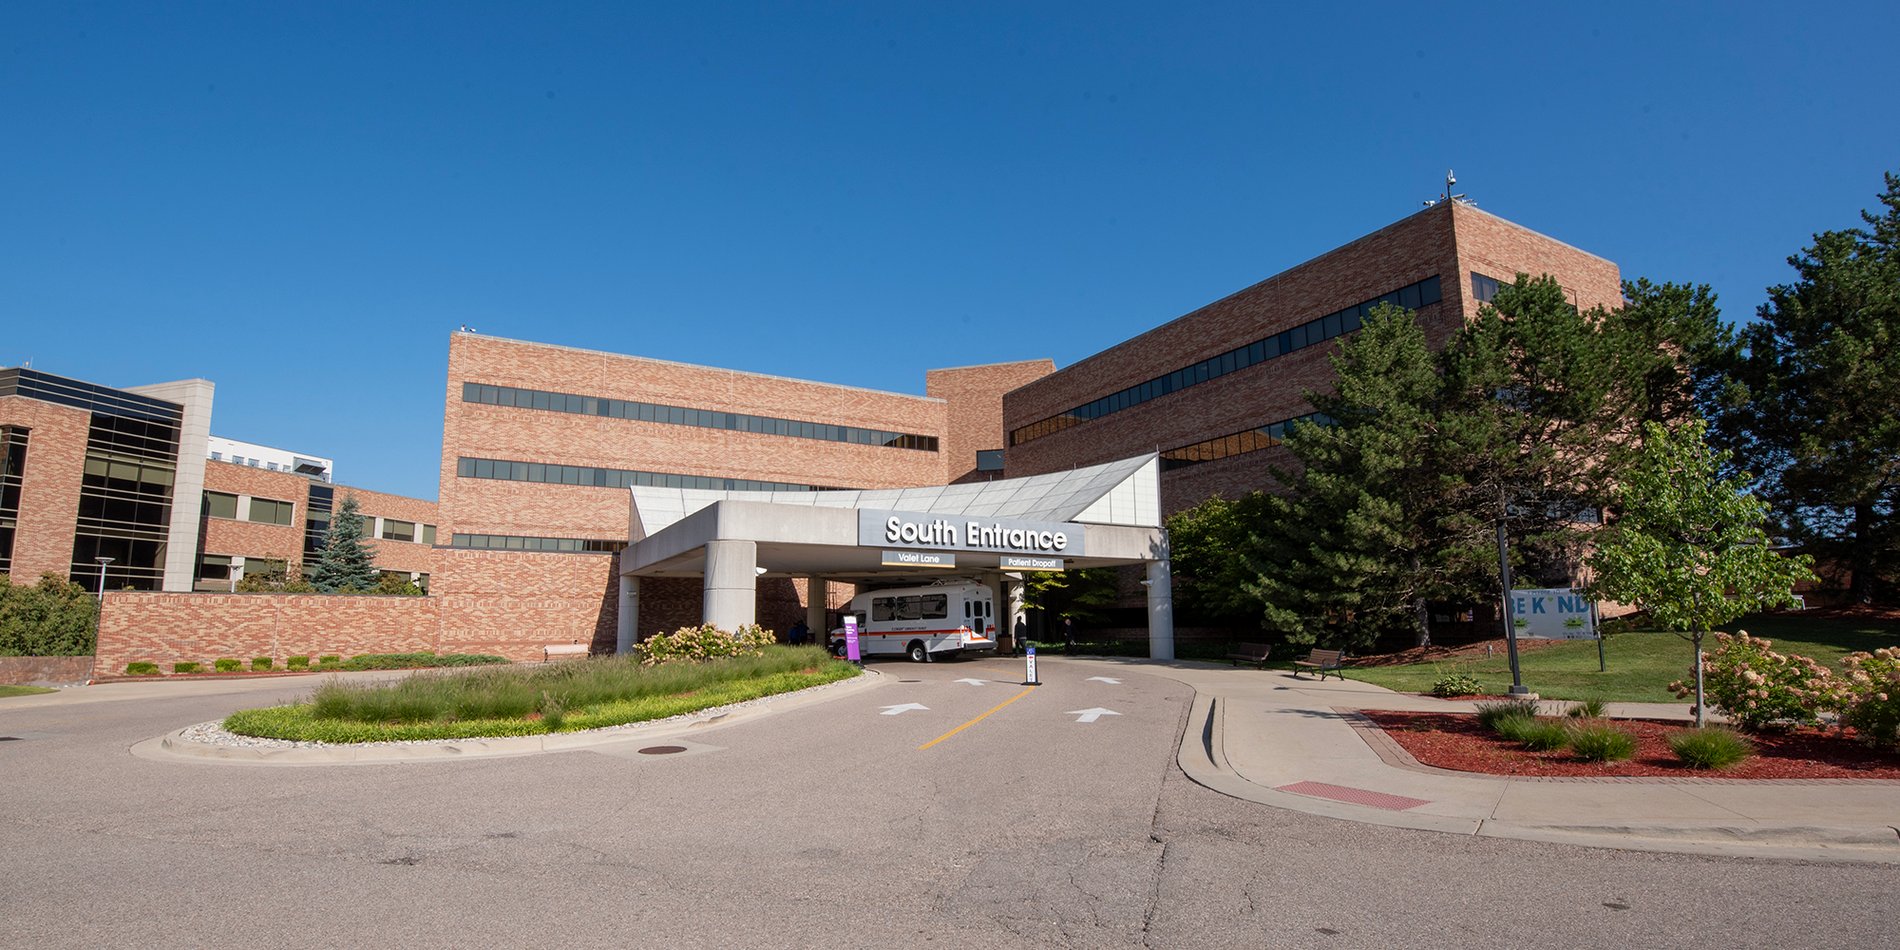 Trinity Health Michigan Heart - Livonia Campus is located in the Marian Professional Building at Trinity Health Livonia Hospital.